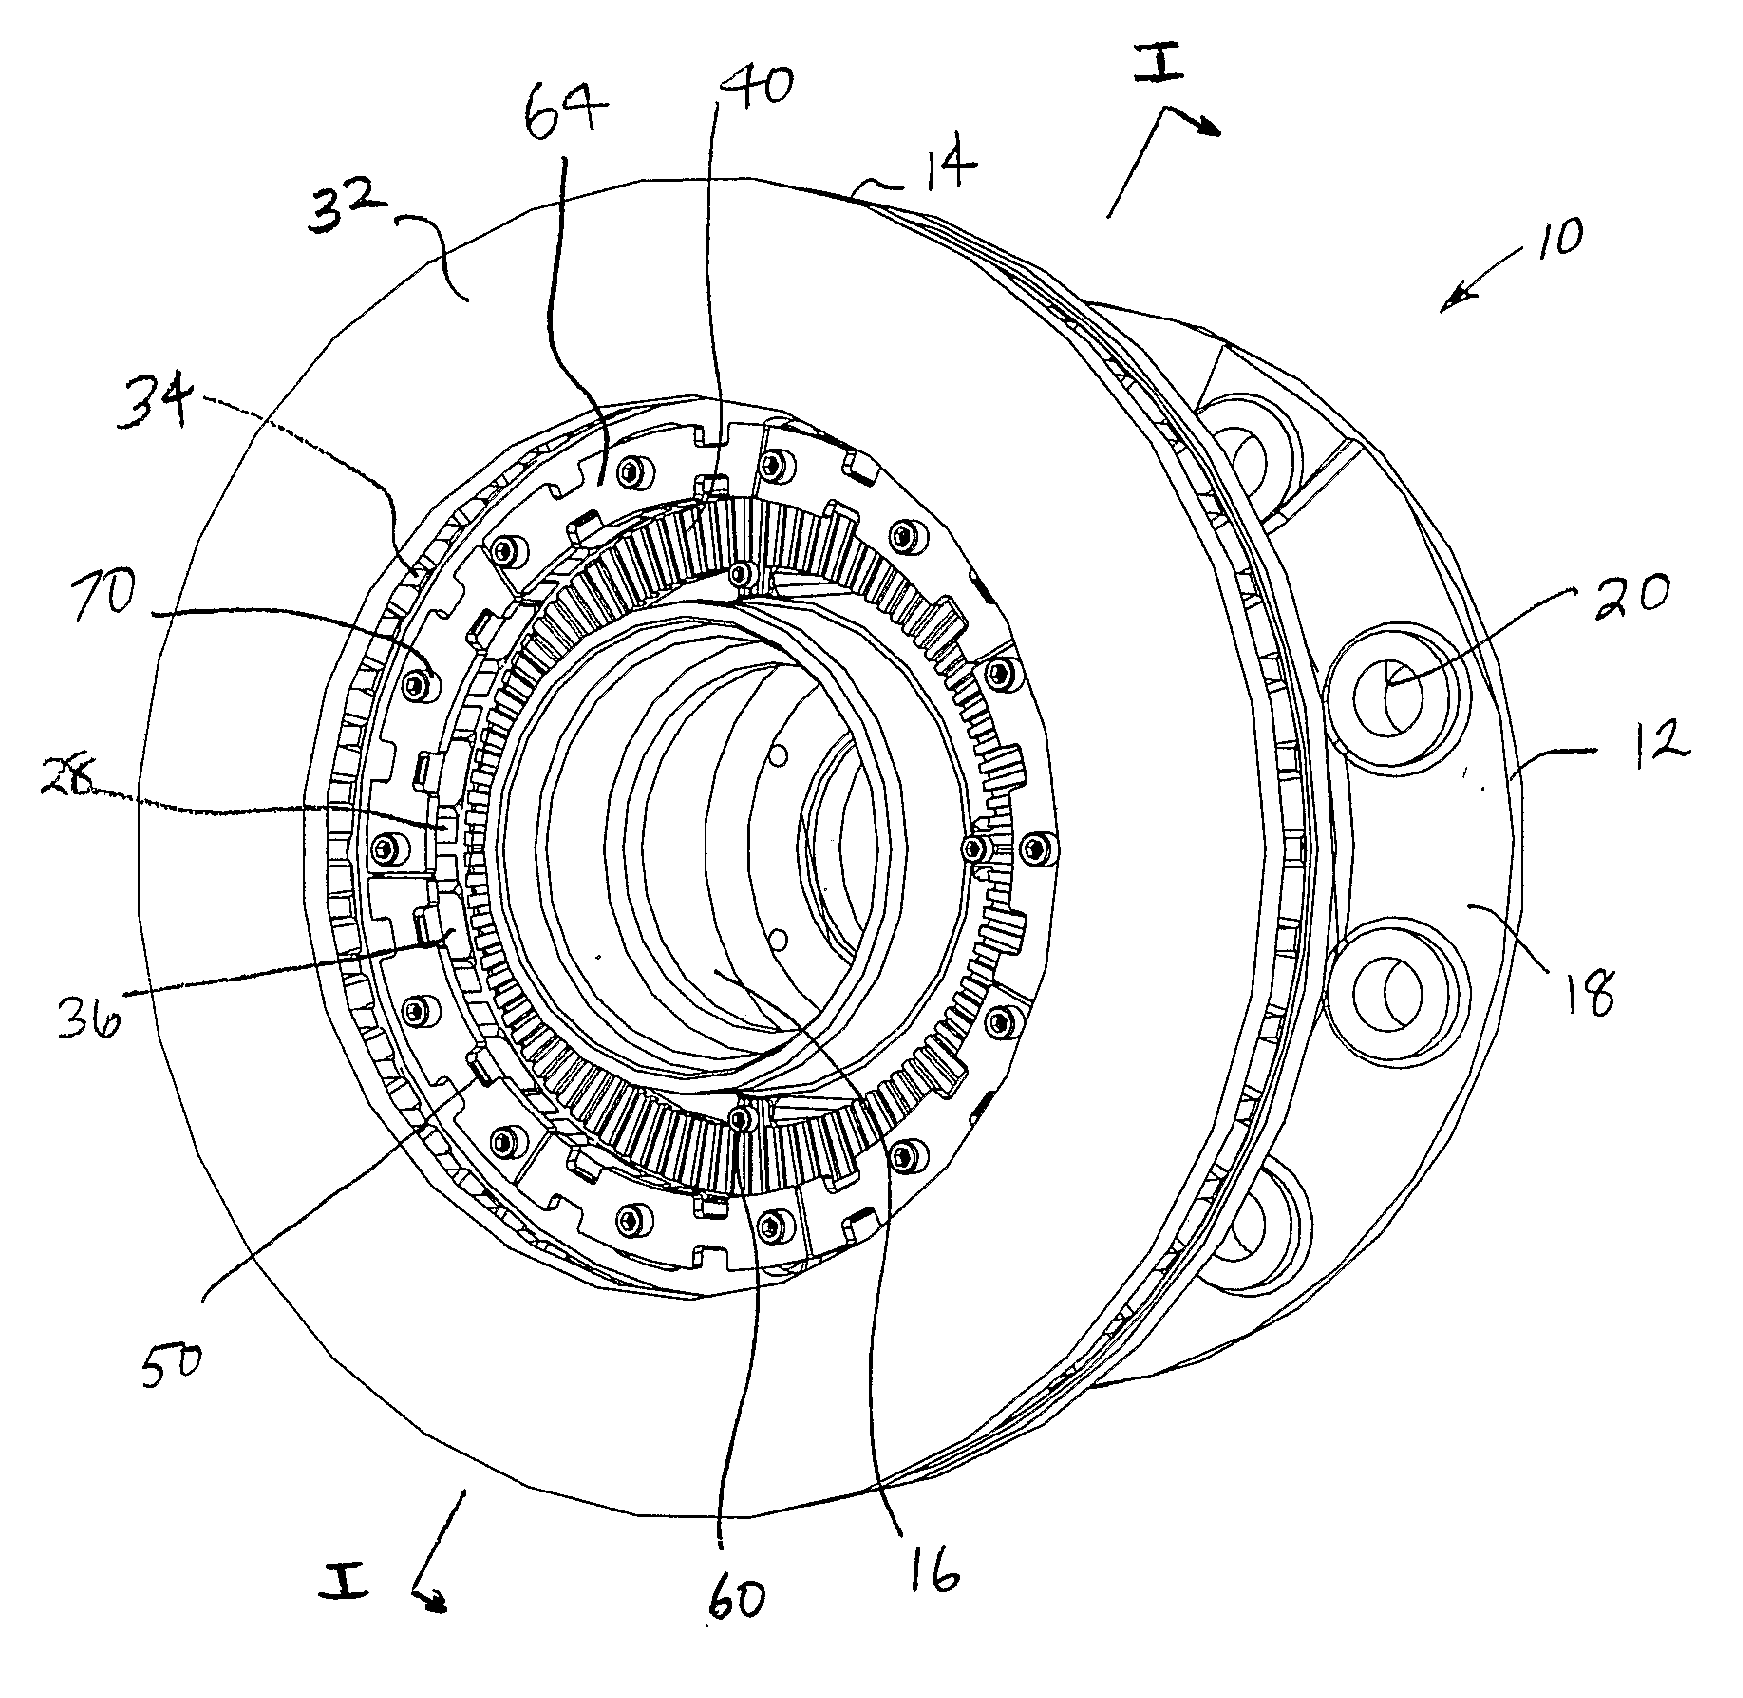 Brake rotor and abs tone ring attachment assembly that promotes in plane uniform torque transfer distribution